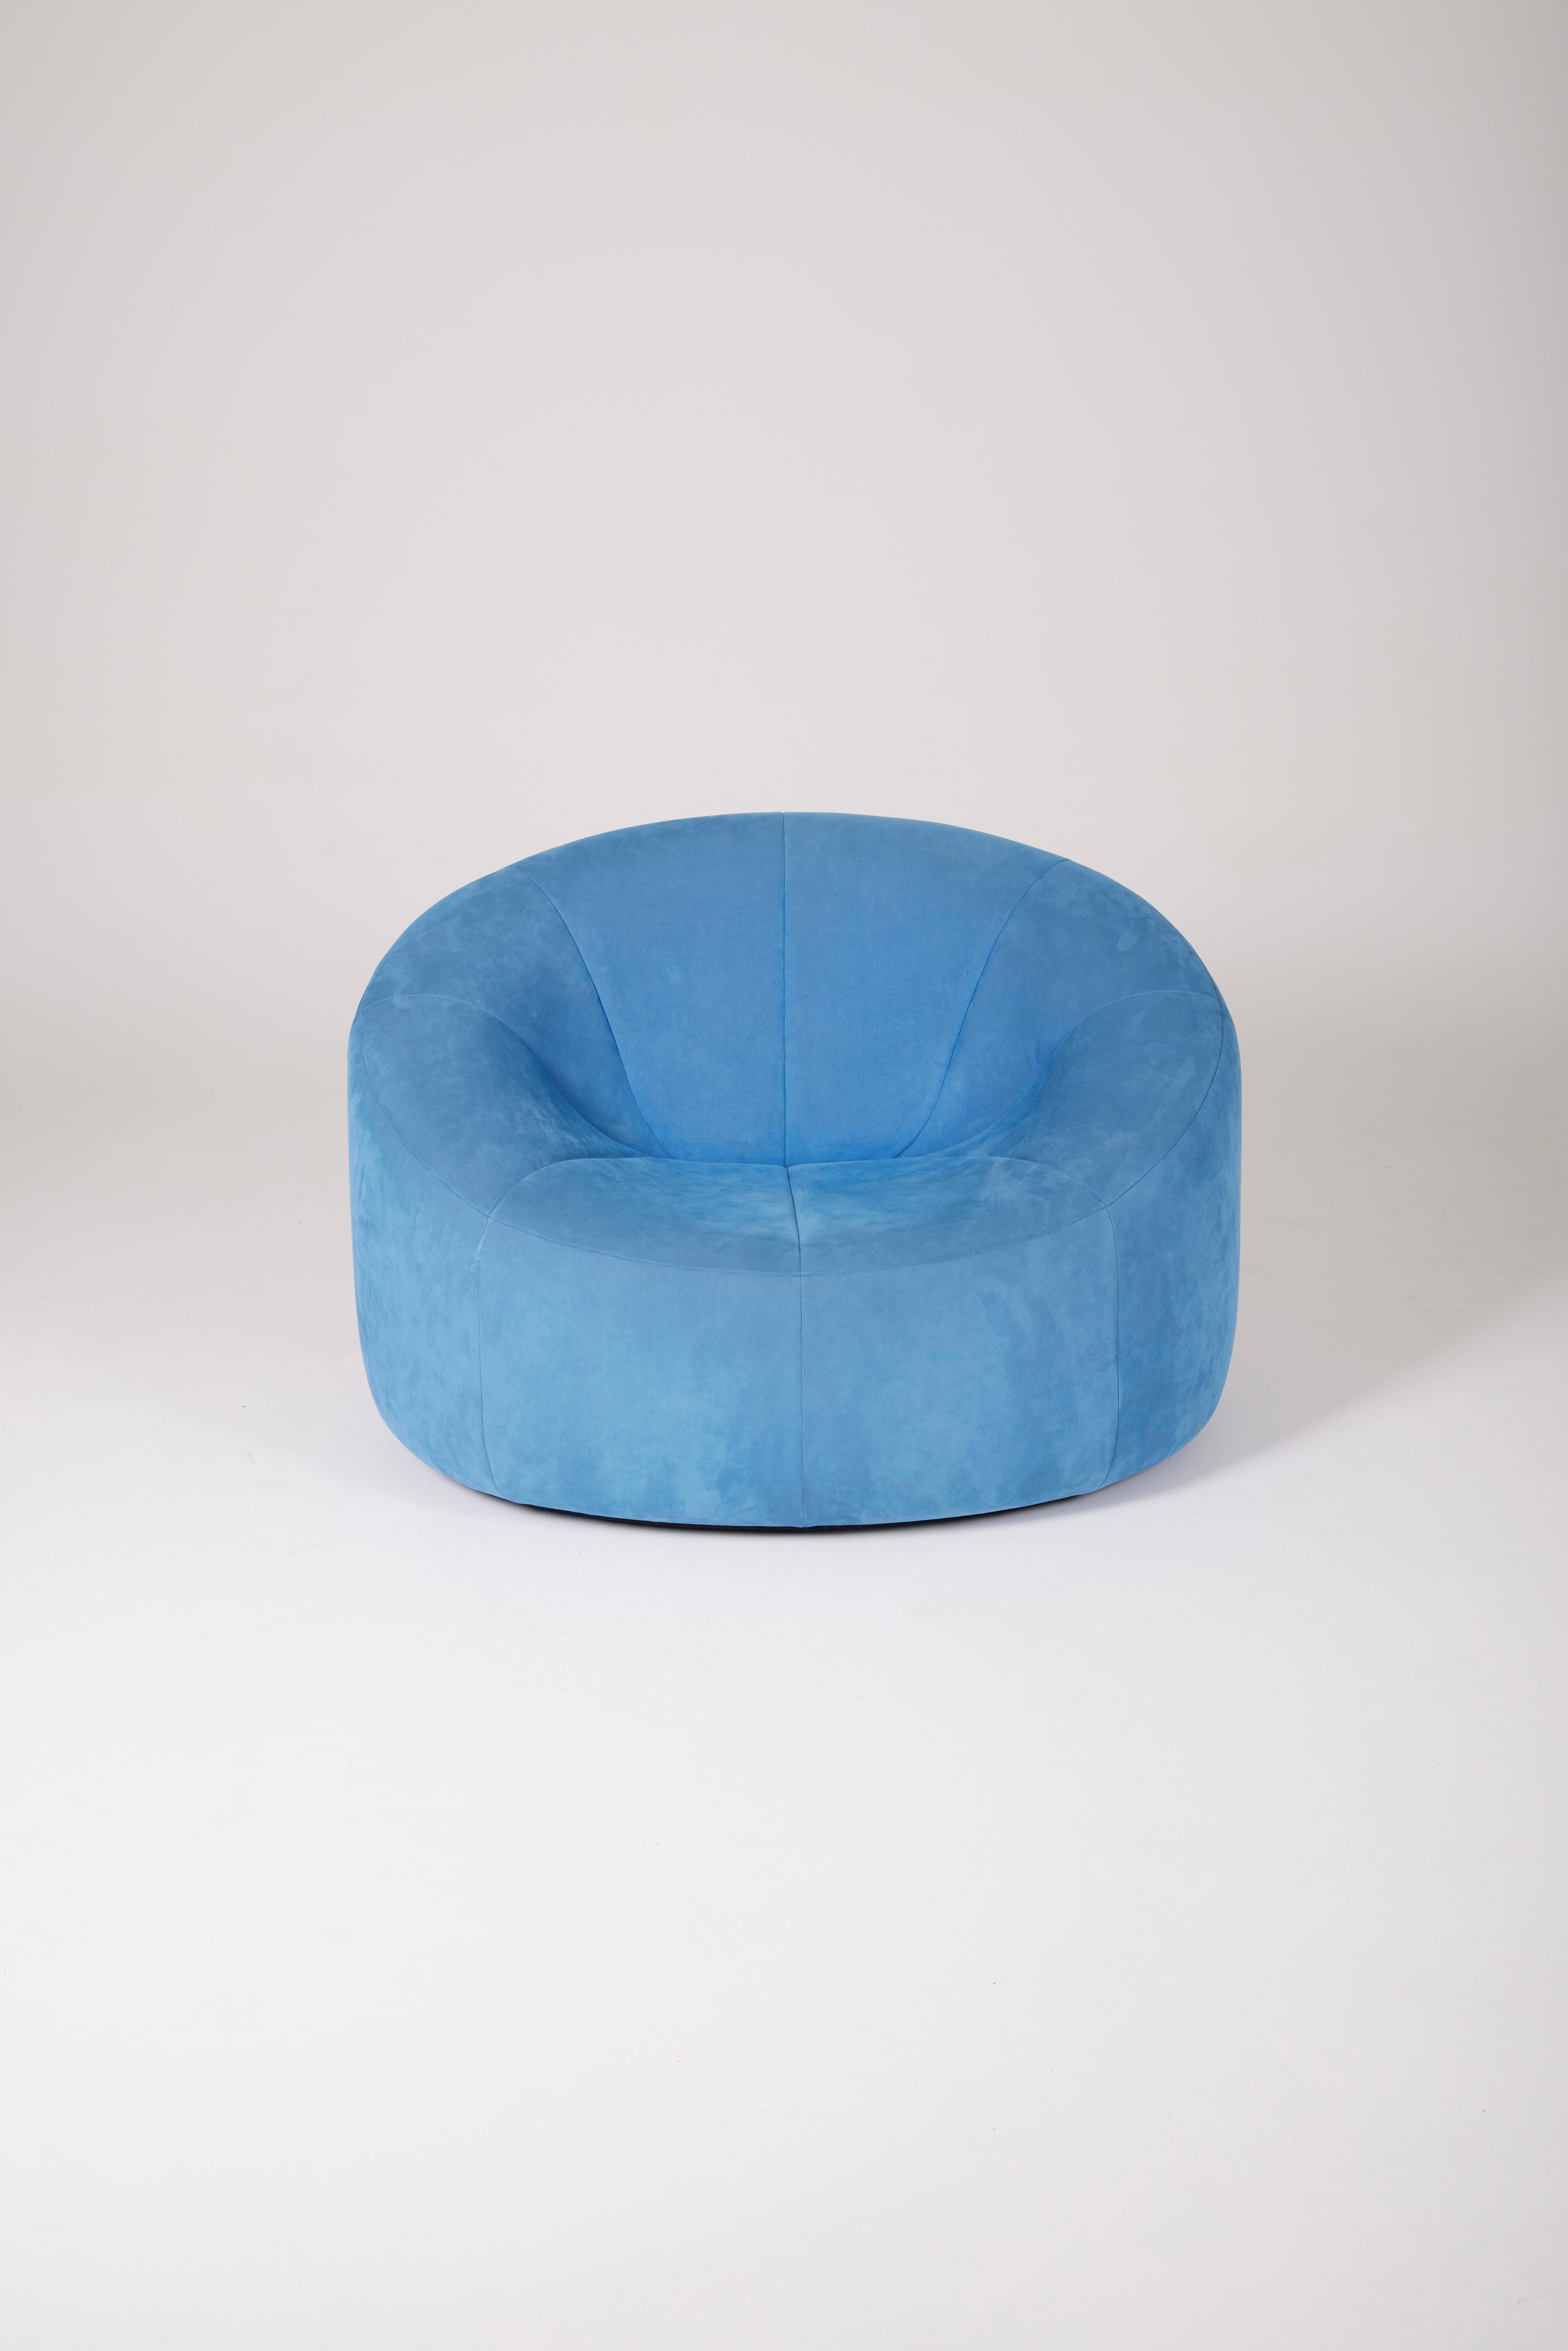 Iconic Pumpkin armchair by designer Pierre Paulin, published by Ligne Roset, 1970. This model was originally designed for the private flats of Claude and Georges Pompidou at the Elysée Palace. This armchair is in its original blue fabric.